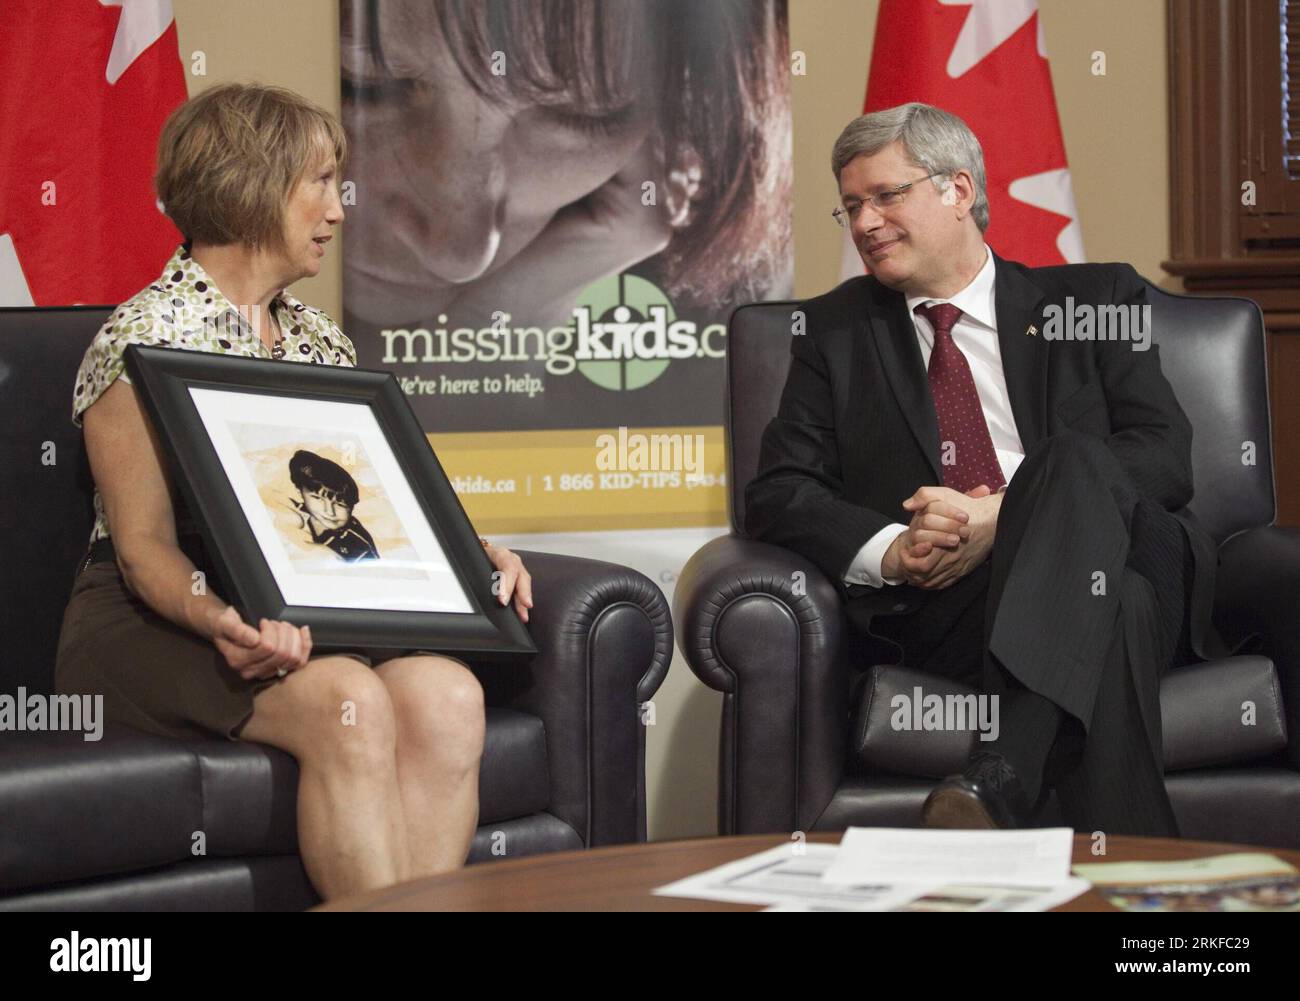 Bildnummer: 55395768  Datum: 24.05.2011  Copyright: imago/Xinhua (110525) -- OTTAWA, May 25, 2011 (Xinhua) -- Canadian Prime Minister Stephen Harper (R) speaks with Crystal Dunahee about her missing son, Michael Dunahee, during a meeting in his office in Ottawa, Canada, May 24, 2011. Canadian Prime Minister Stephen Harper said Tuesday that more than 50,000 children are reported missing in Canada each year, vowing to further crack down on crimes against children. (Xinhua/Jason Ransom) (cl) CANADA-HARPER-MISSING CHILDREN PUBLICATIONxNOTxINxCHN Politik People kbdig xub 2011 quer premiumd     Bild Stock Photo